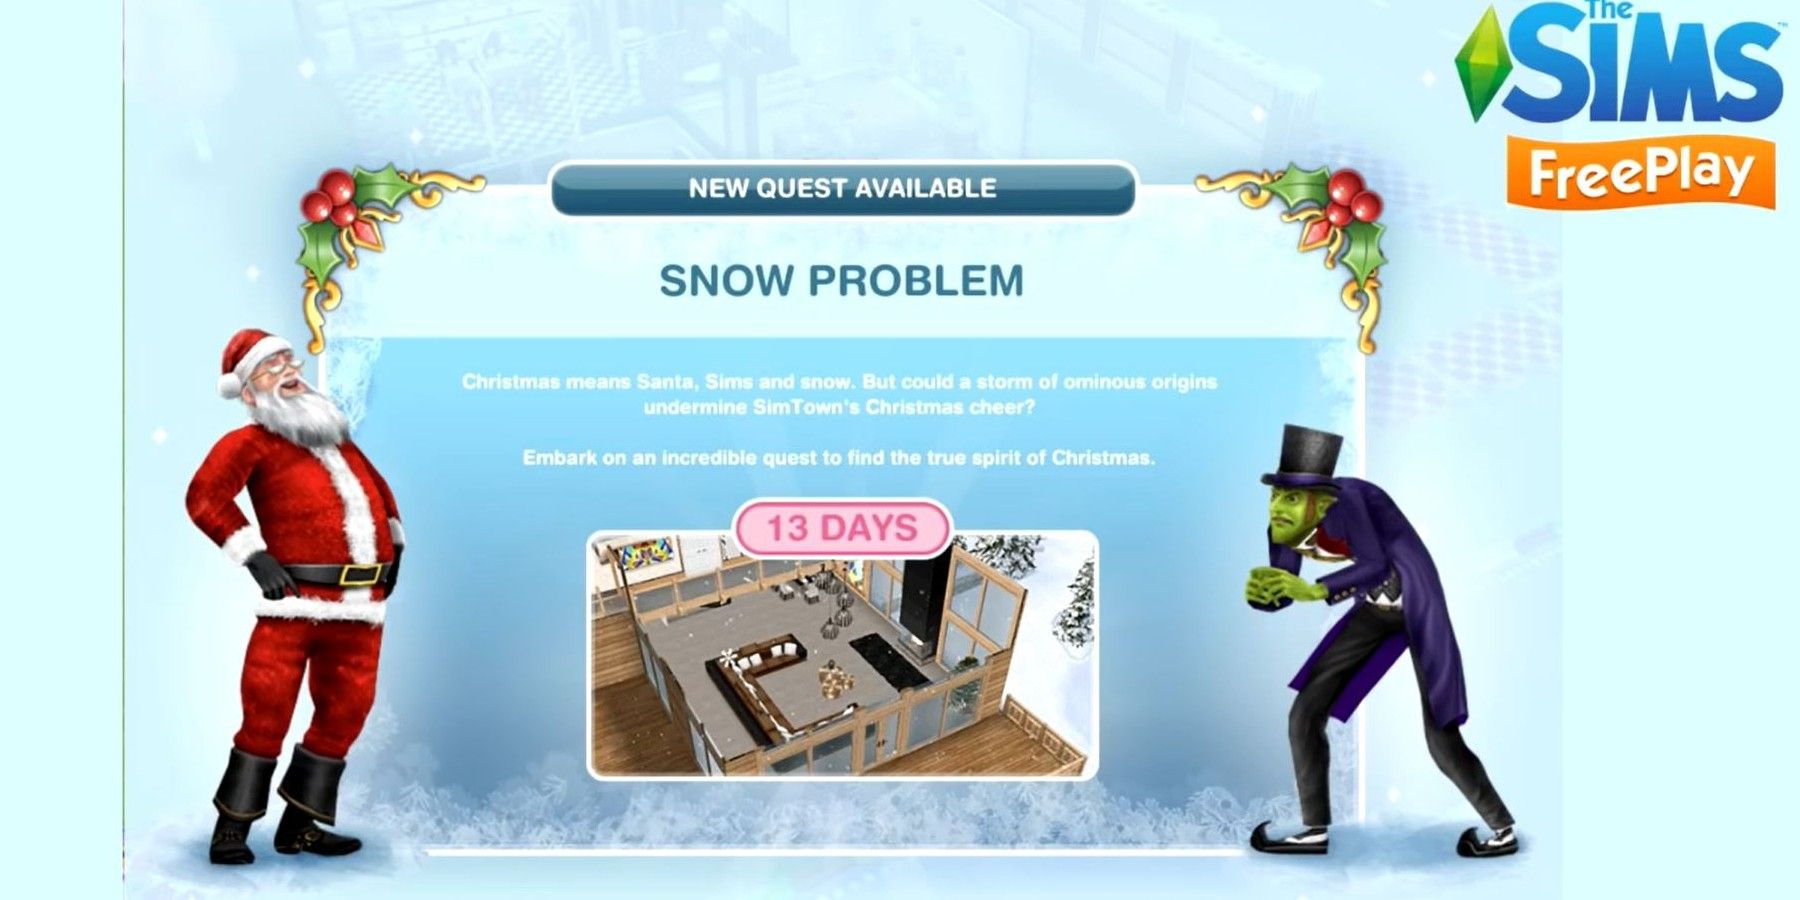 The Sims Freeplay Snow Problem Quest Explained The Quest Can Barely Be Completed On Time Without Using Lifestyle Points LP Currency